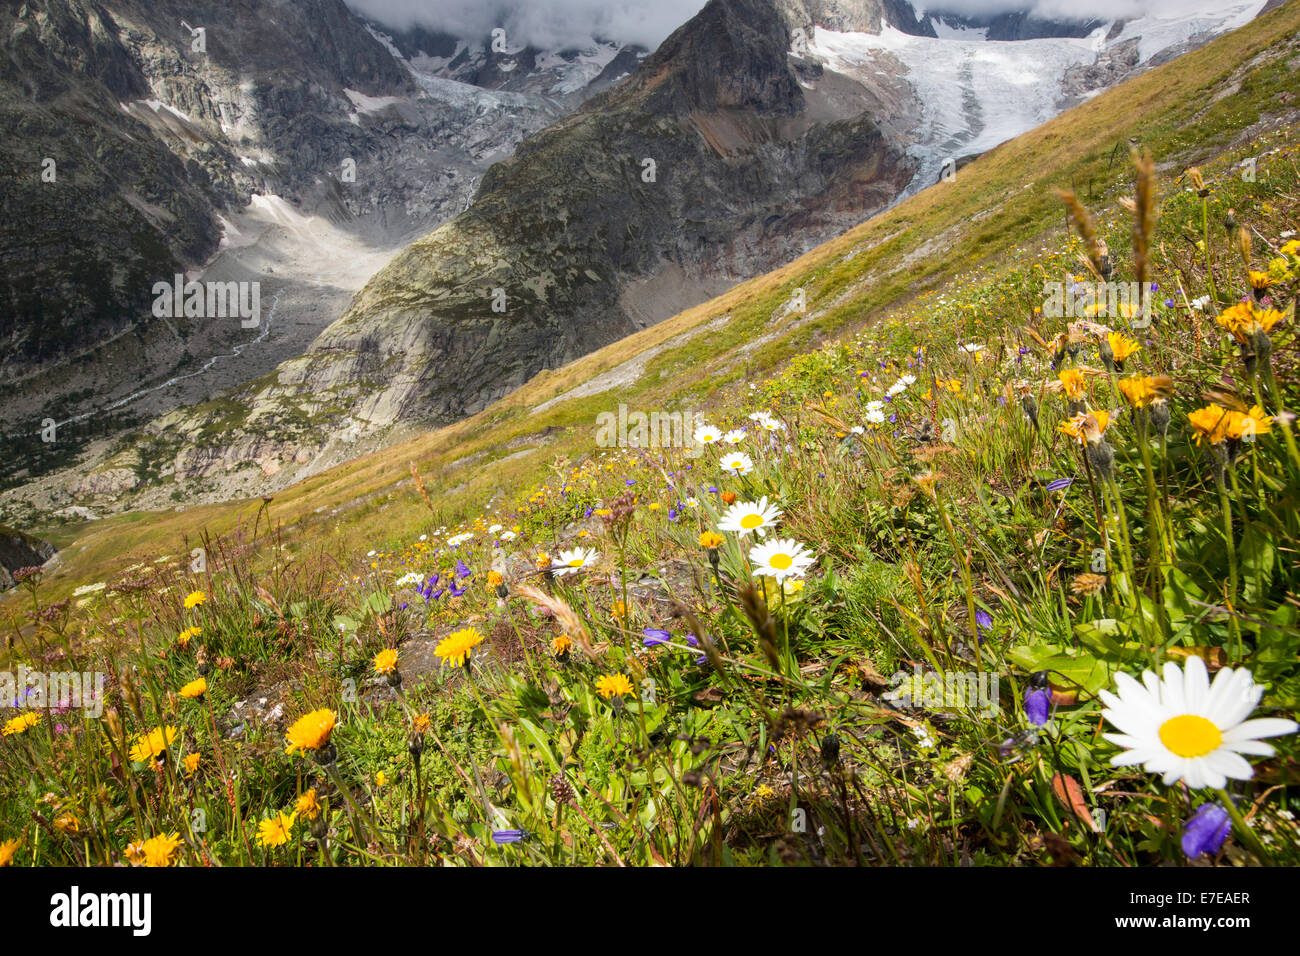 Alpine flowers infront of the rapidly receding Glacier de pre de Bar in the Mont Blanc range, Italy. Research has shown that as Stock Photo